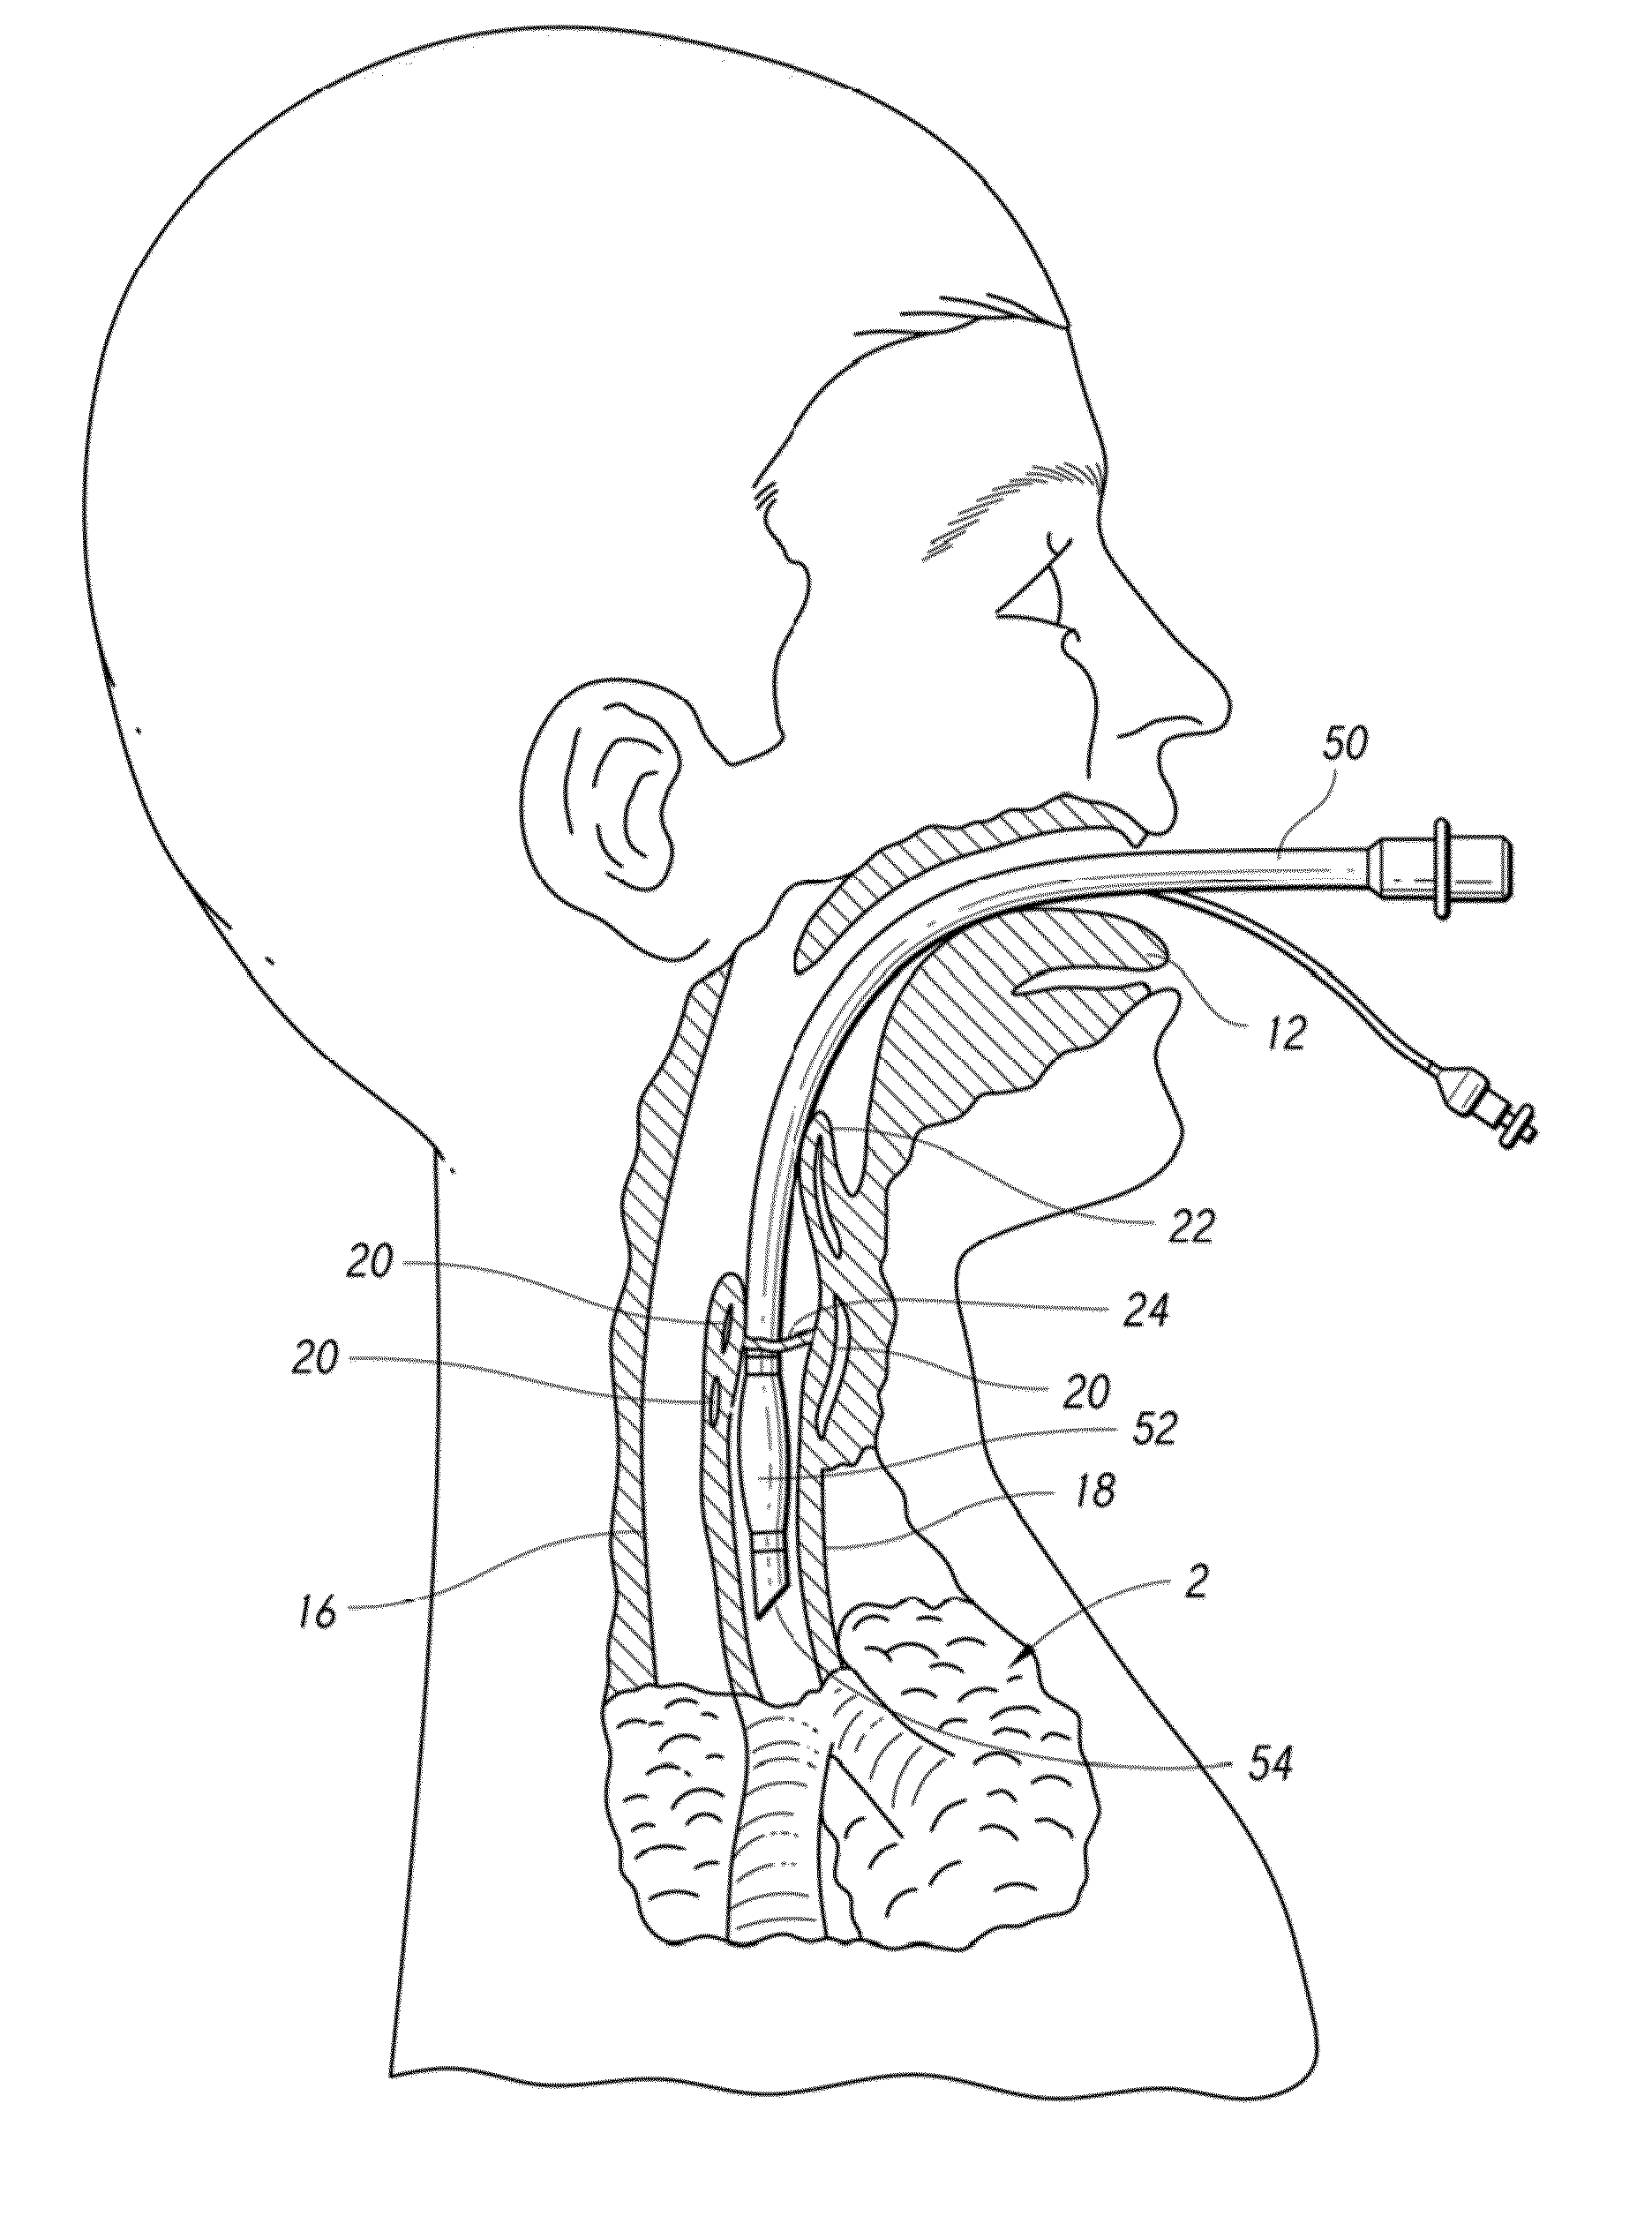 Apparatus and method for improved assisted ventilation